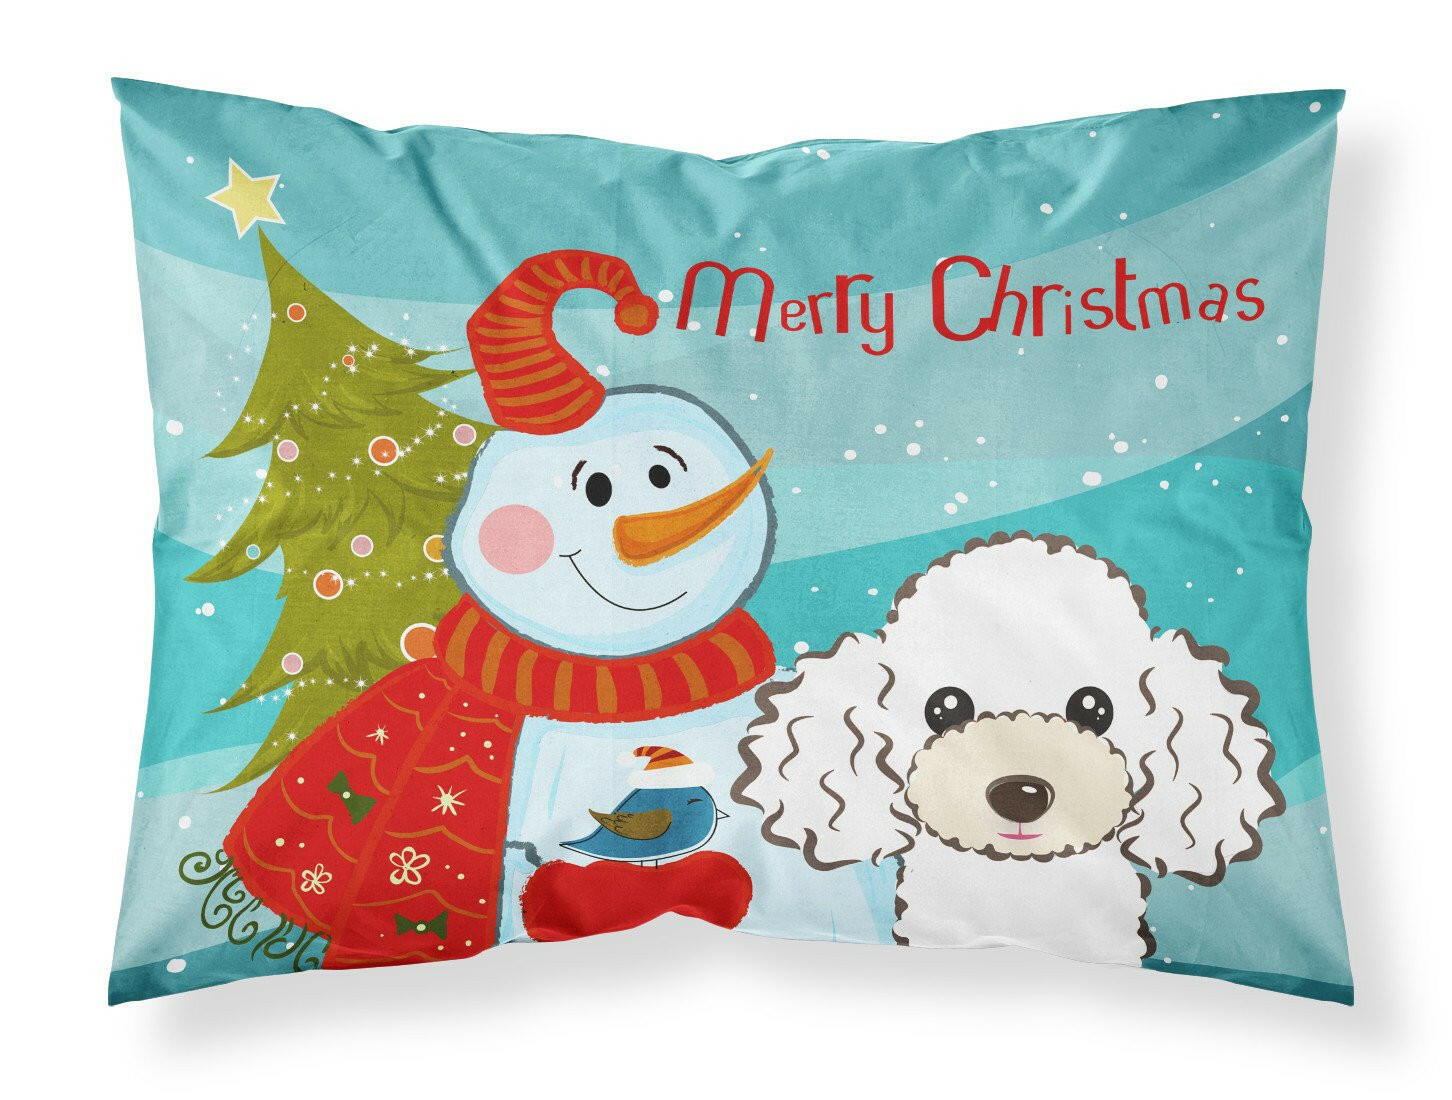 Snowman with White Poodle Fabric Standard Pillowcase BB1877PILLOWCASE by Caroline's Treasures